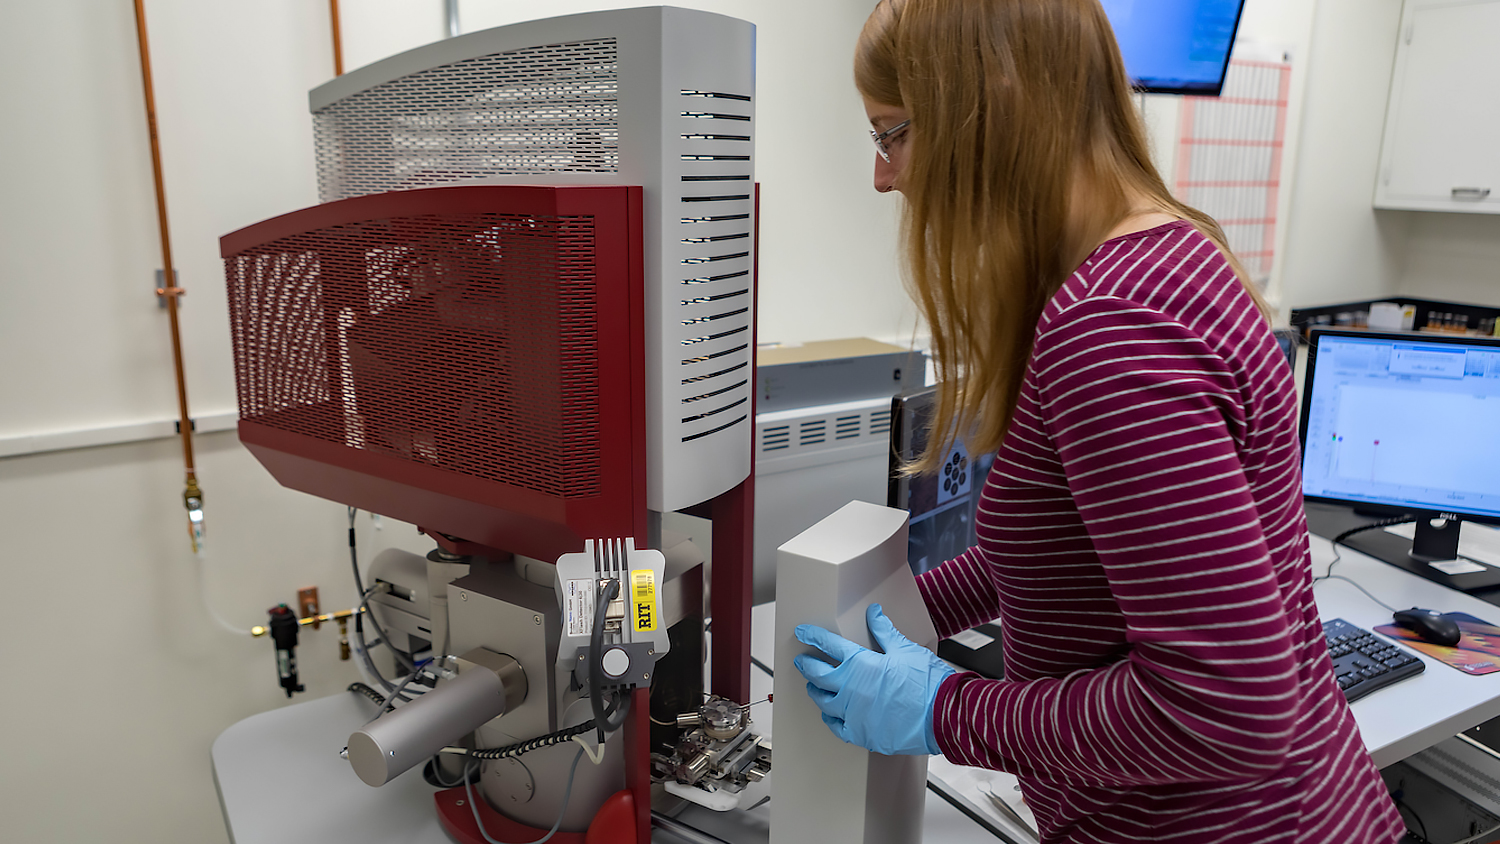 Female student working with equipment in imaging lab